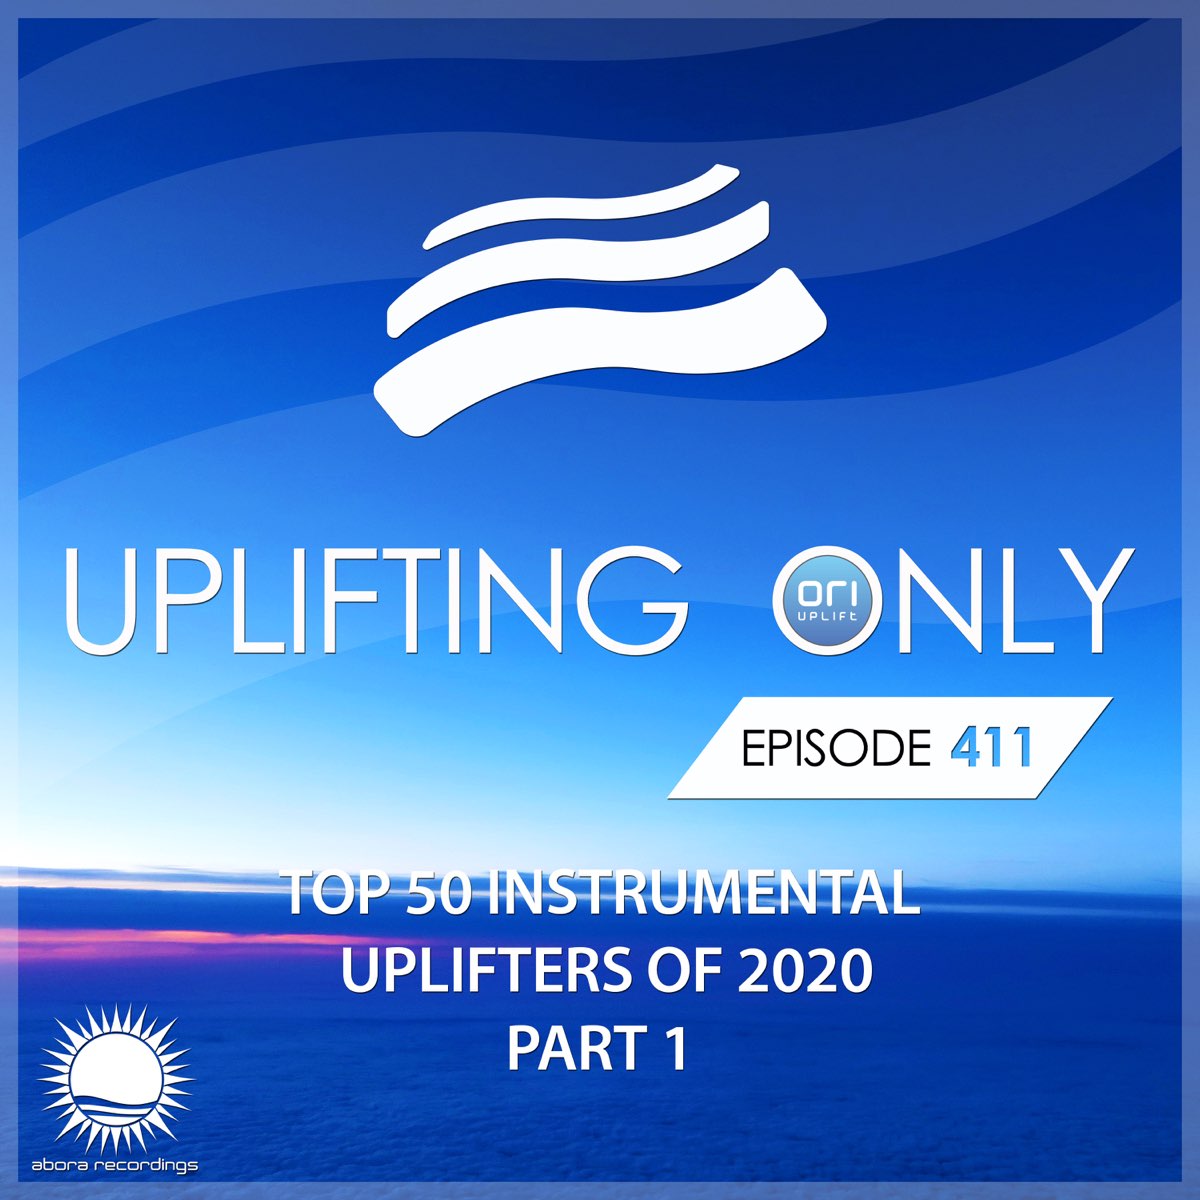 Only ep. Uplifting only 536. Uplifter. Ori uplift - first Symphonic Breakdown year Mix (Continuous Mix).